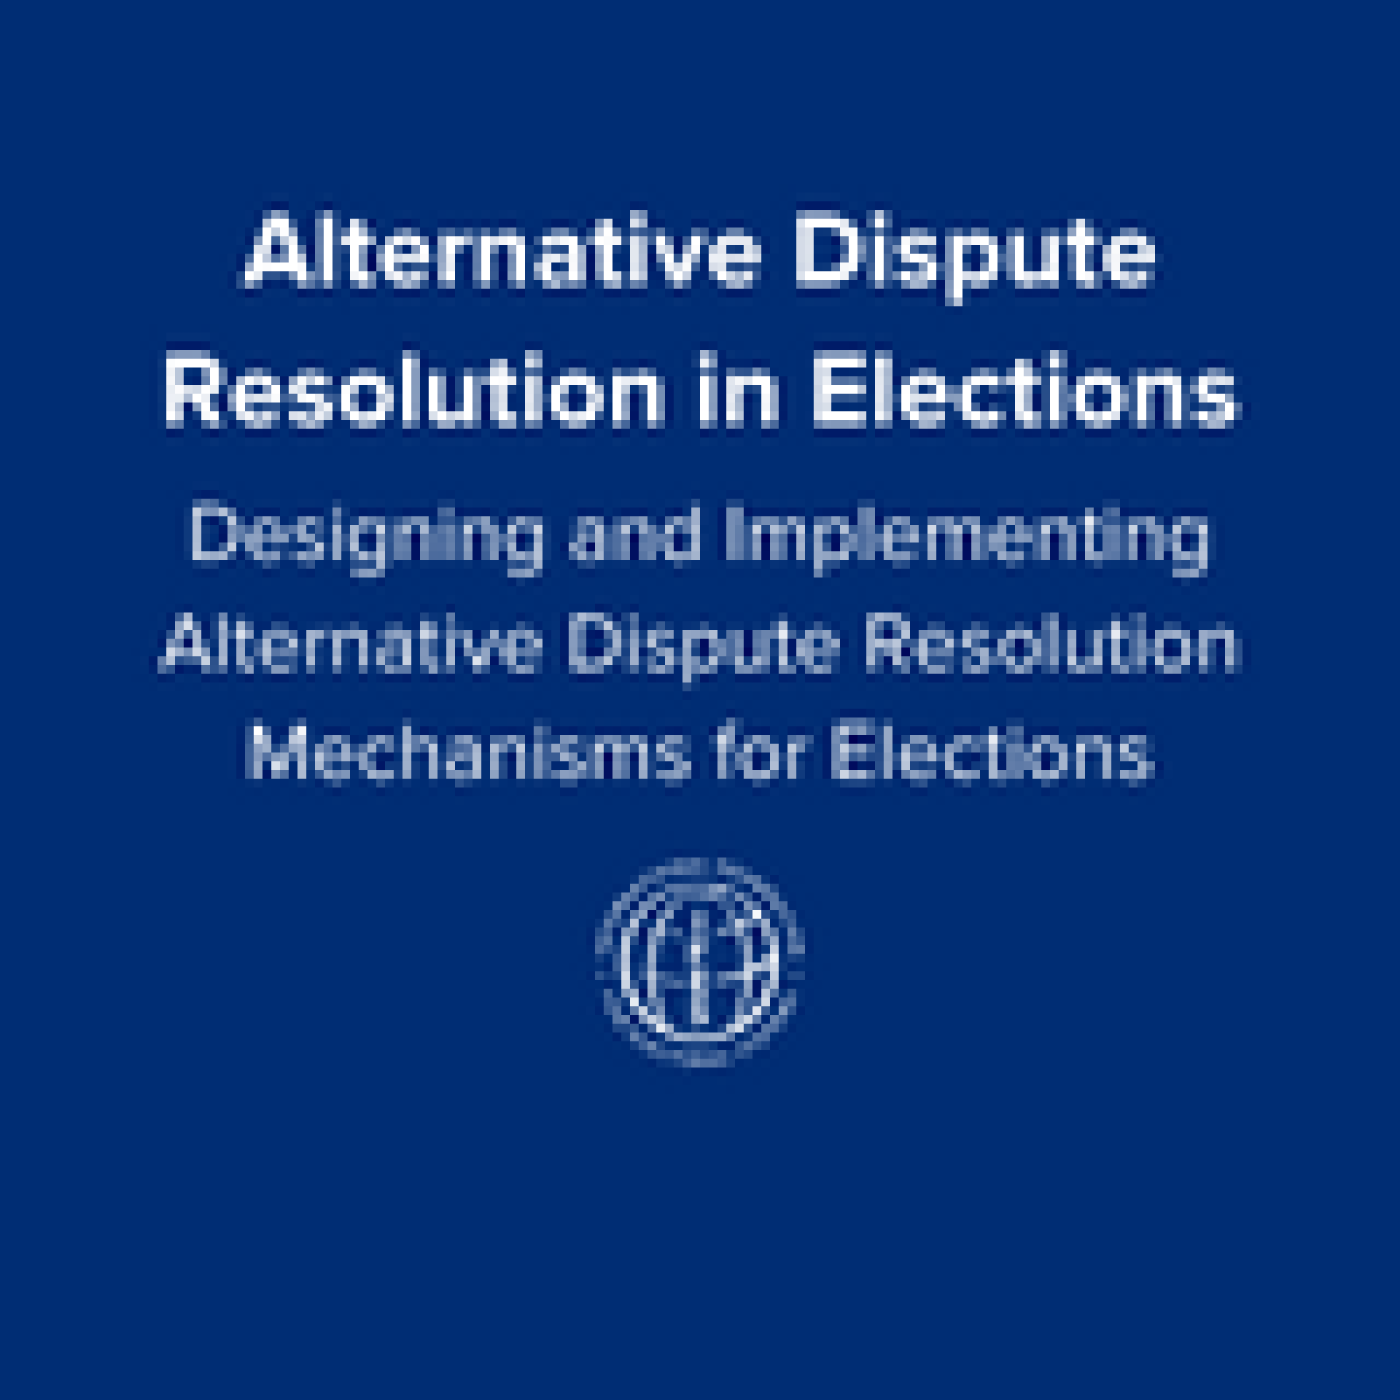 Designing and Implementing Alternative Dispute Resolution Mechanisms for Elections